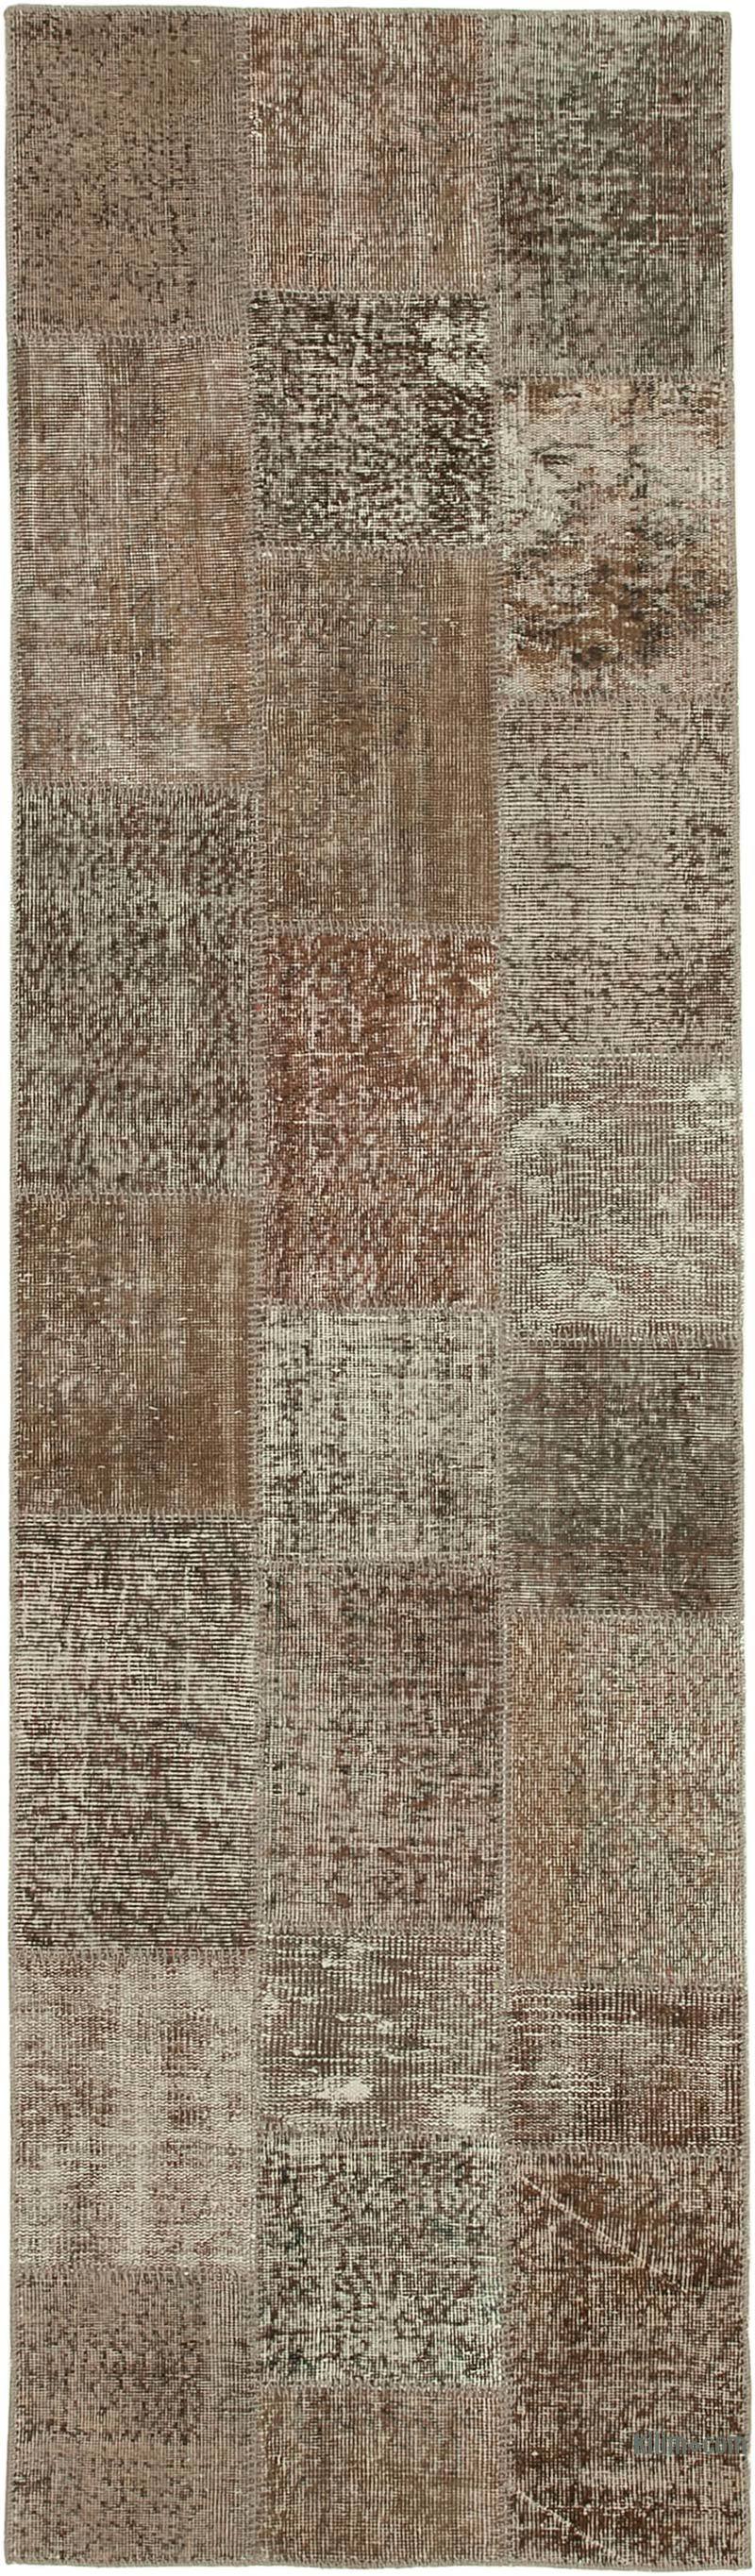 Brown Patchwork Hand-Knotted Turkish Runner - 2' 10" x 9' 11" (34 in. x 119 in.) - K0053876